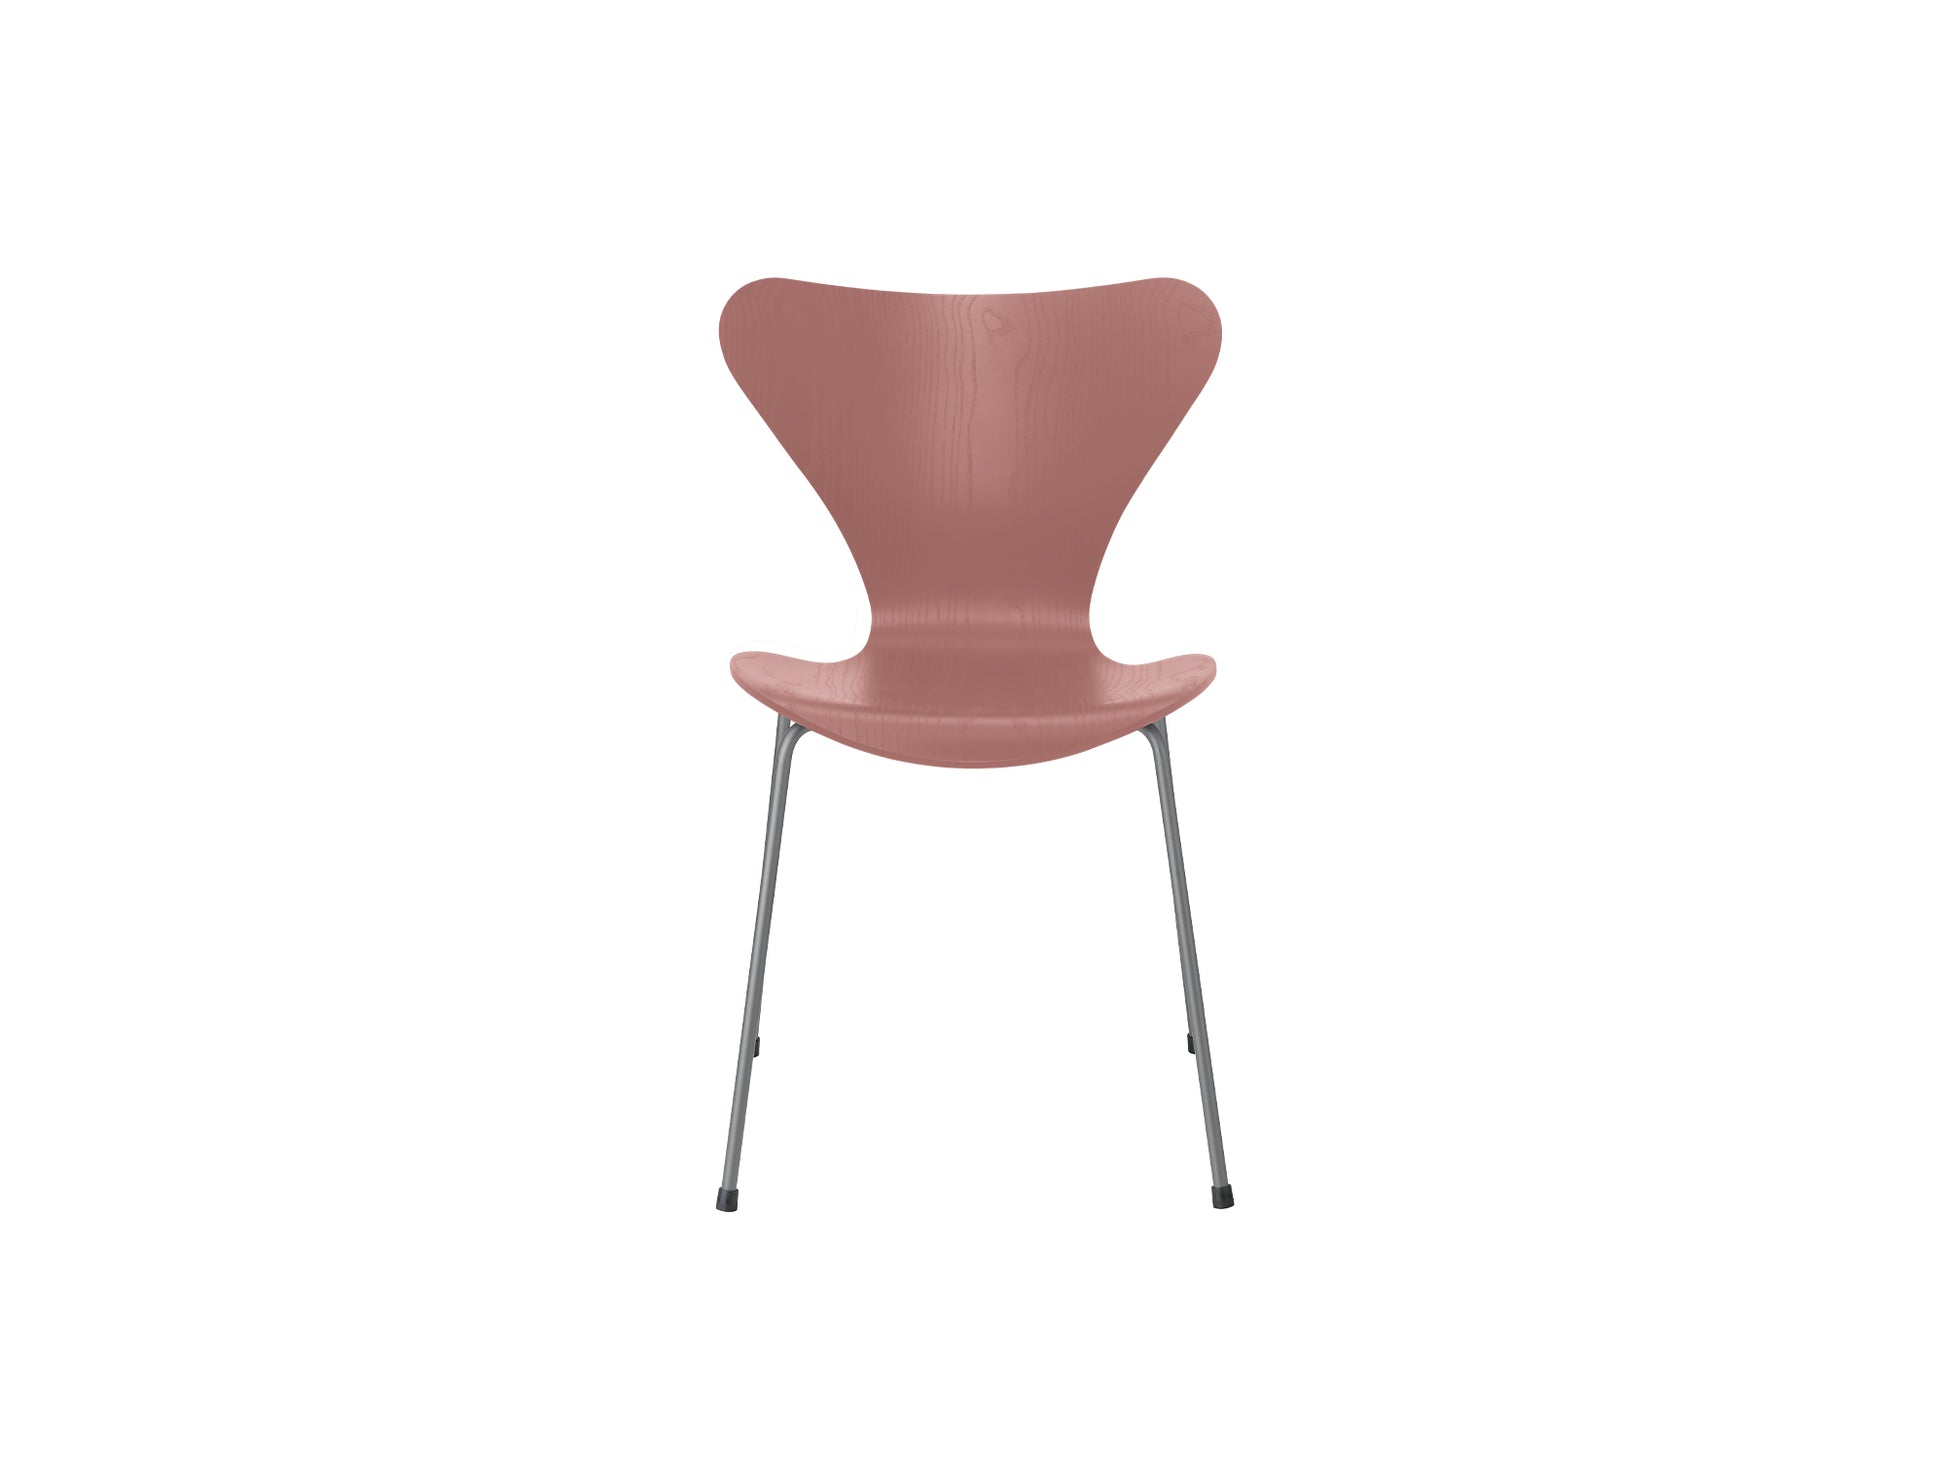 Series 7™ 3107 Dining Chair by Fritz Hansen - Wild Rose Coloured Ash Veneer Shell / Silver Grey Steel